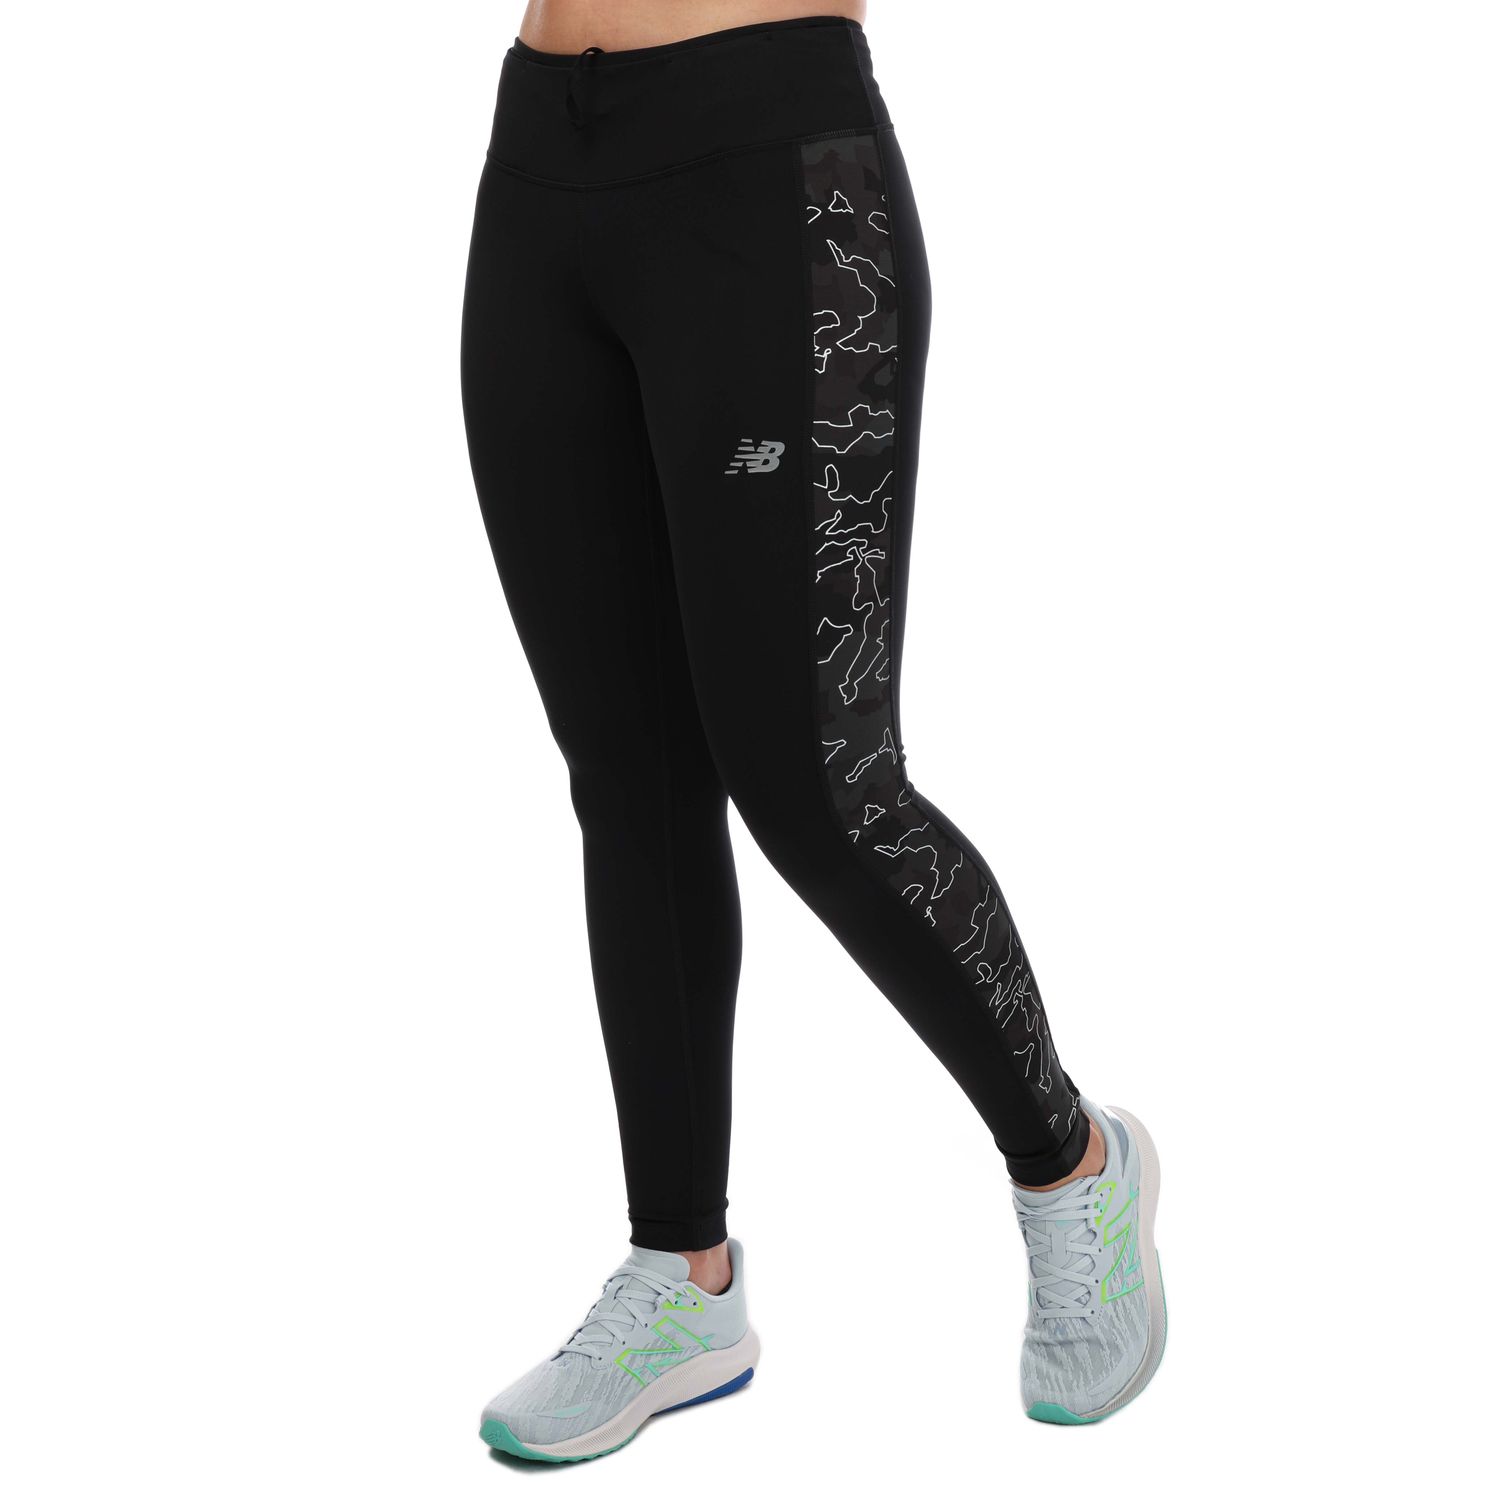 Running Tights and Trousers - Accelerate UK Ltd